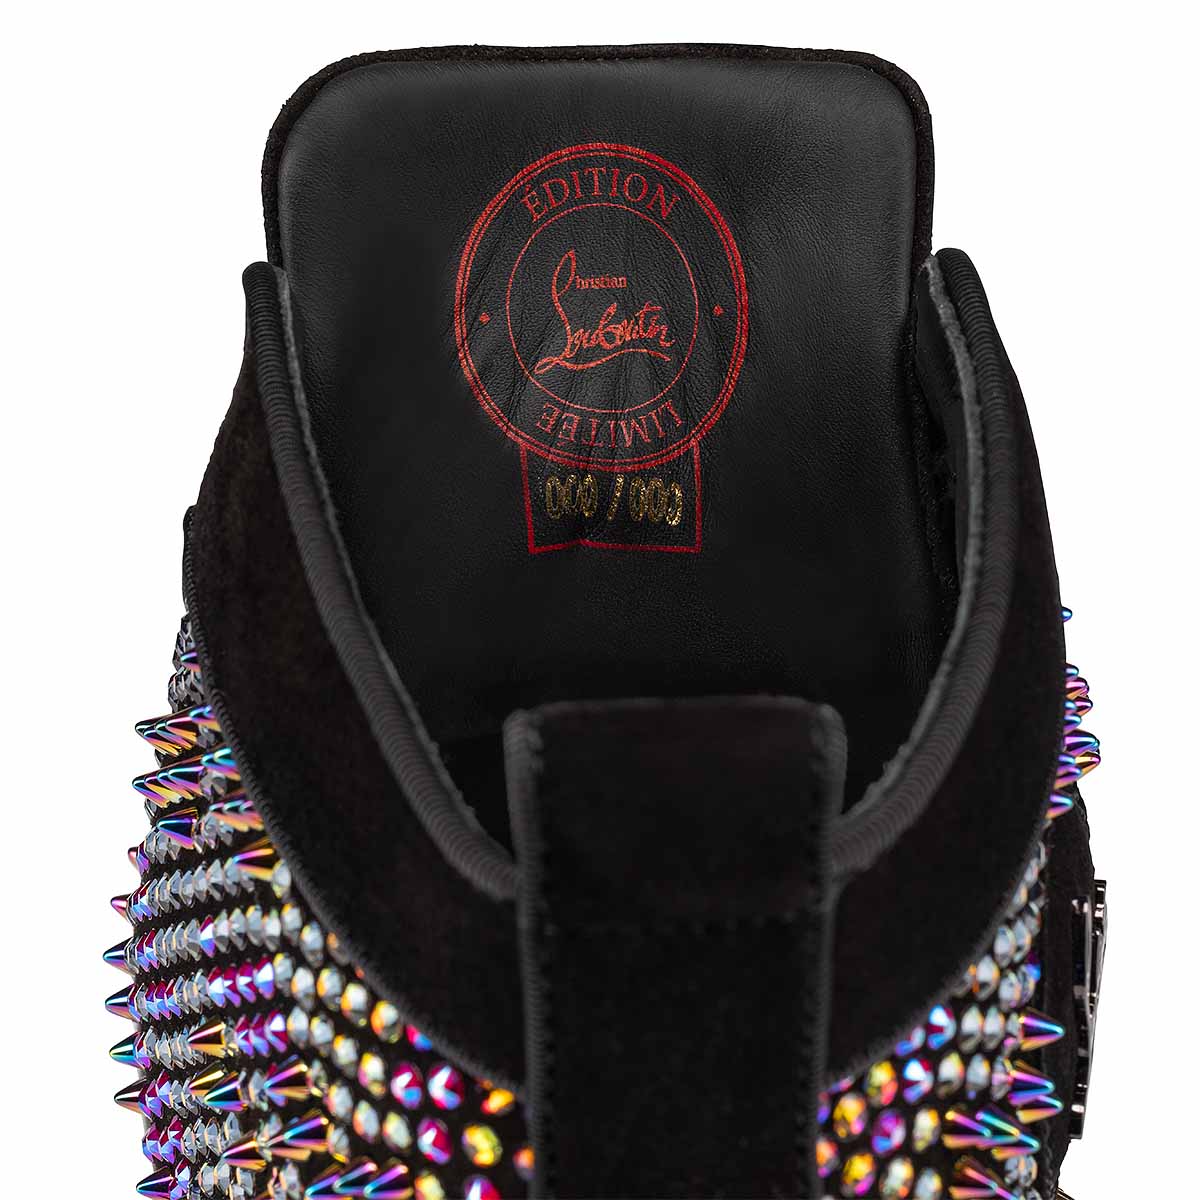 christian louboutin louis strass high top mint condition ($2,999 Msrp)